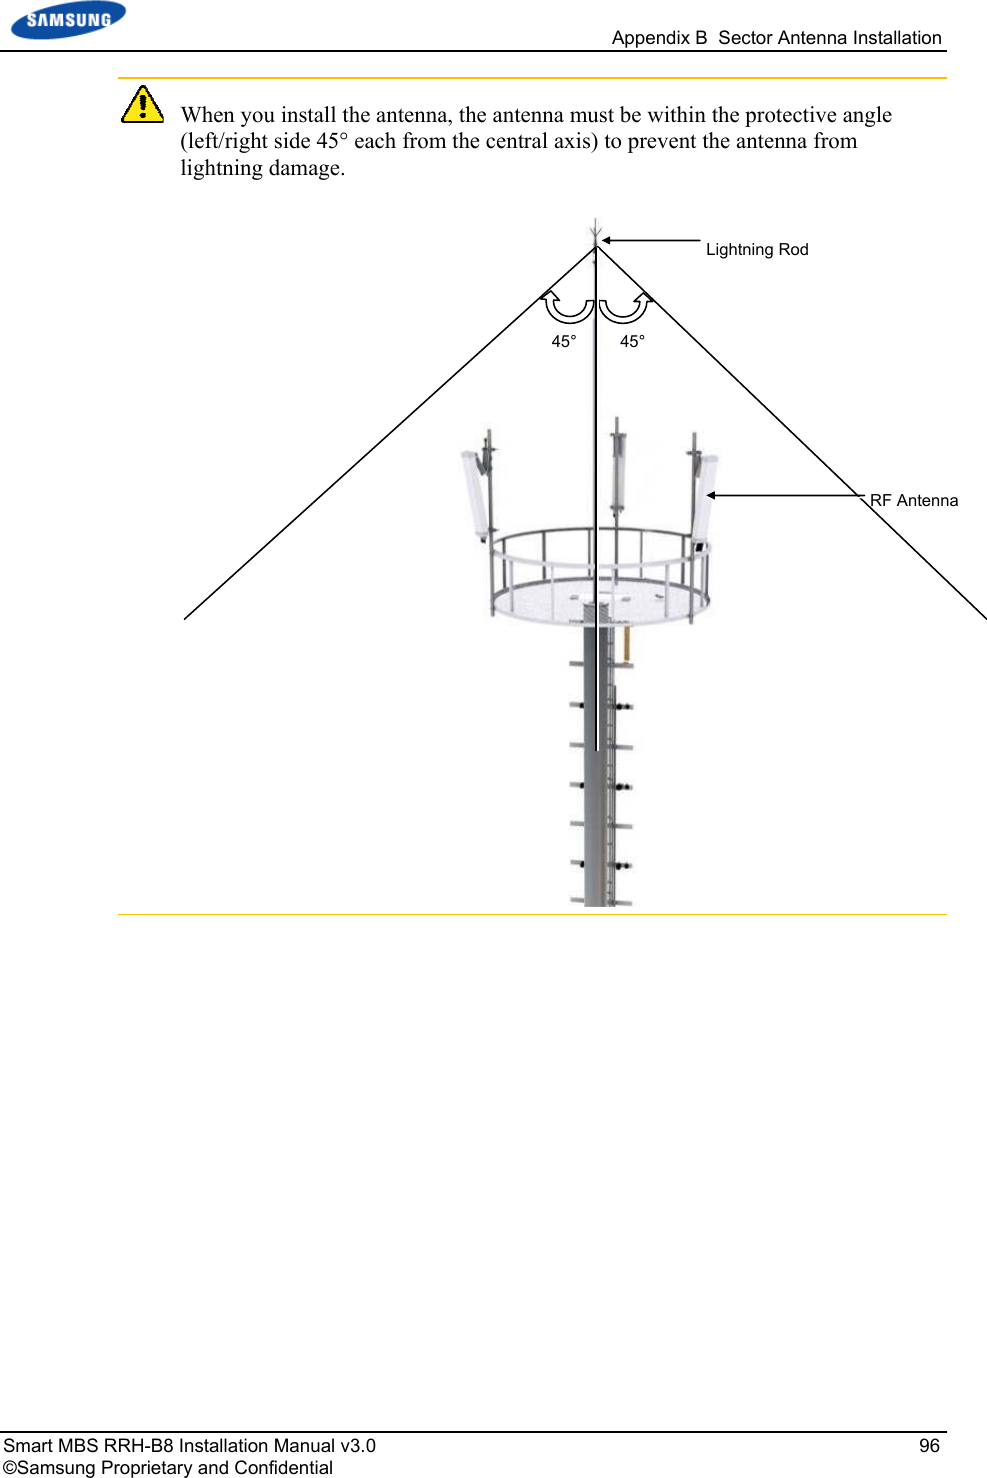   Appendix B  Sector Antenna Installation Smart MBS RRH-B8 Installation Manual v3.0   96 ©Samsung Proprietary and Confidential  When you install the antenna, the antenna must be within the protective angle (left/right side 45° each from the central axis) to prevent the antenna from lightning damage.    Lightning Rod 45°45°RF Antenna 